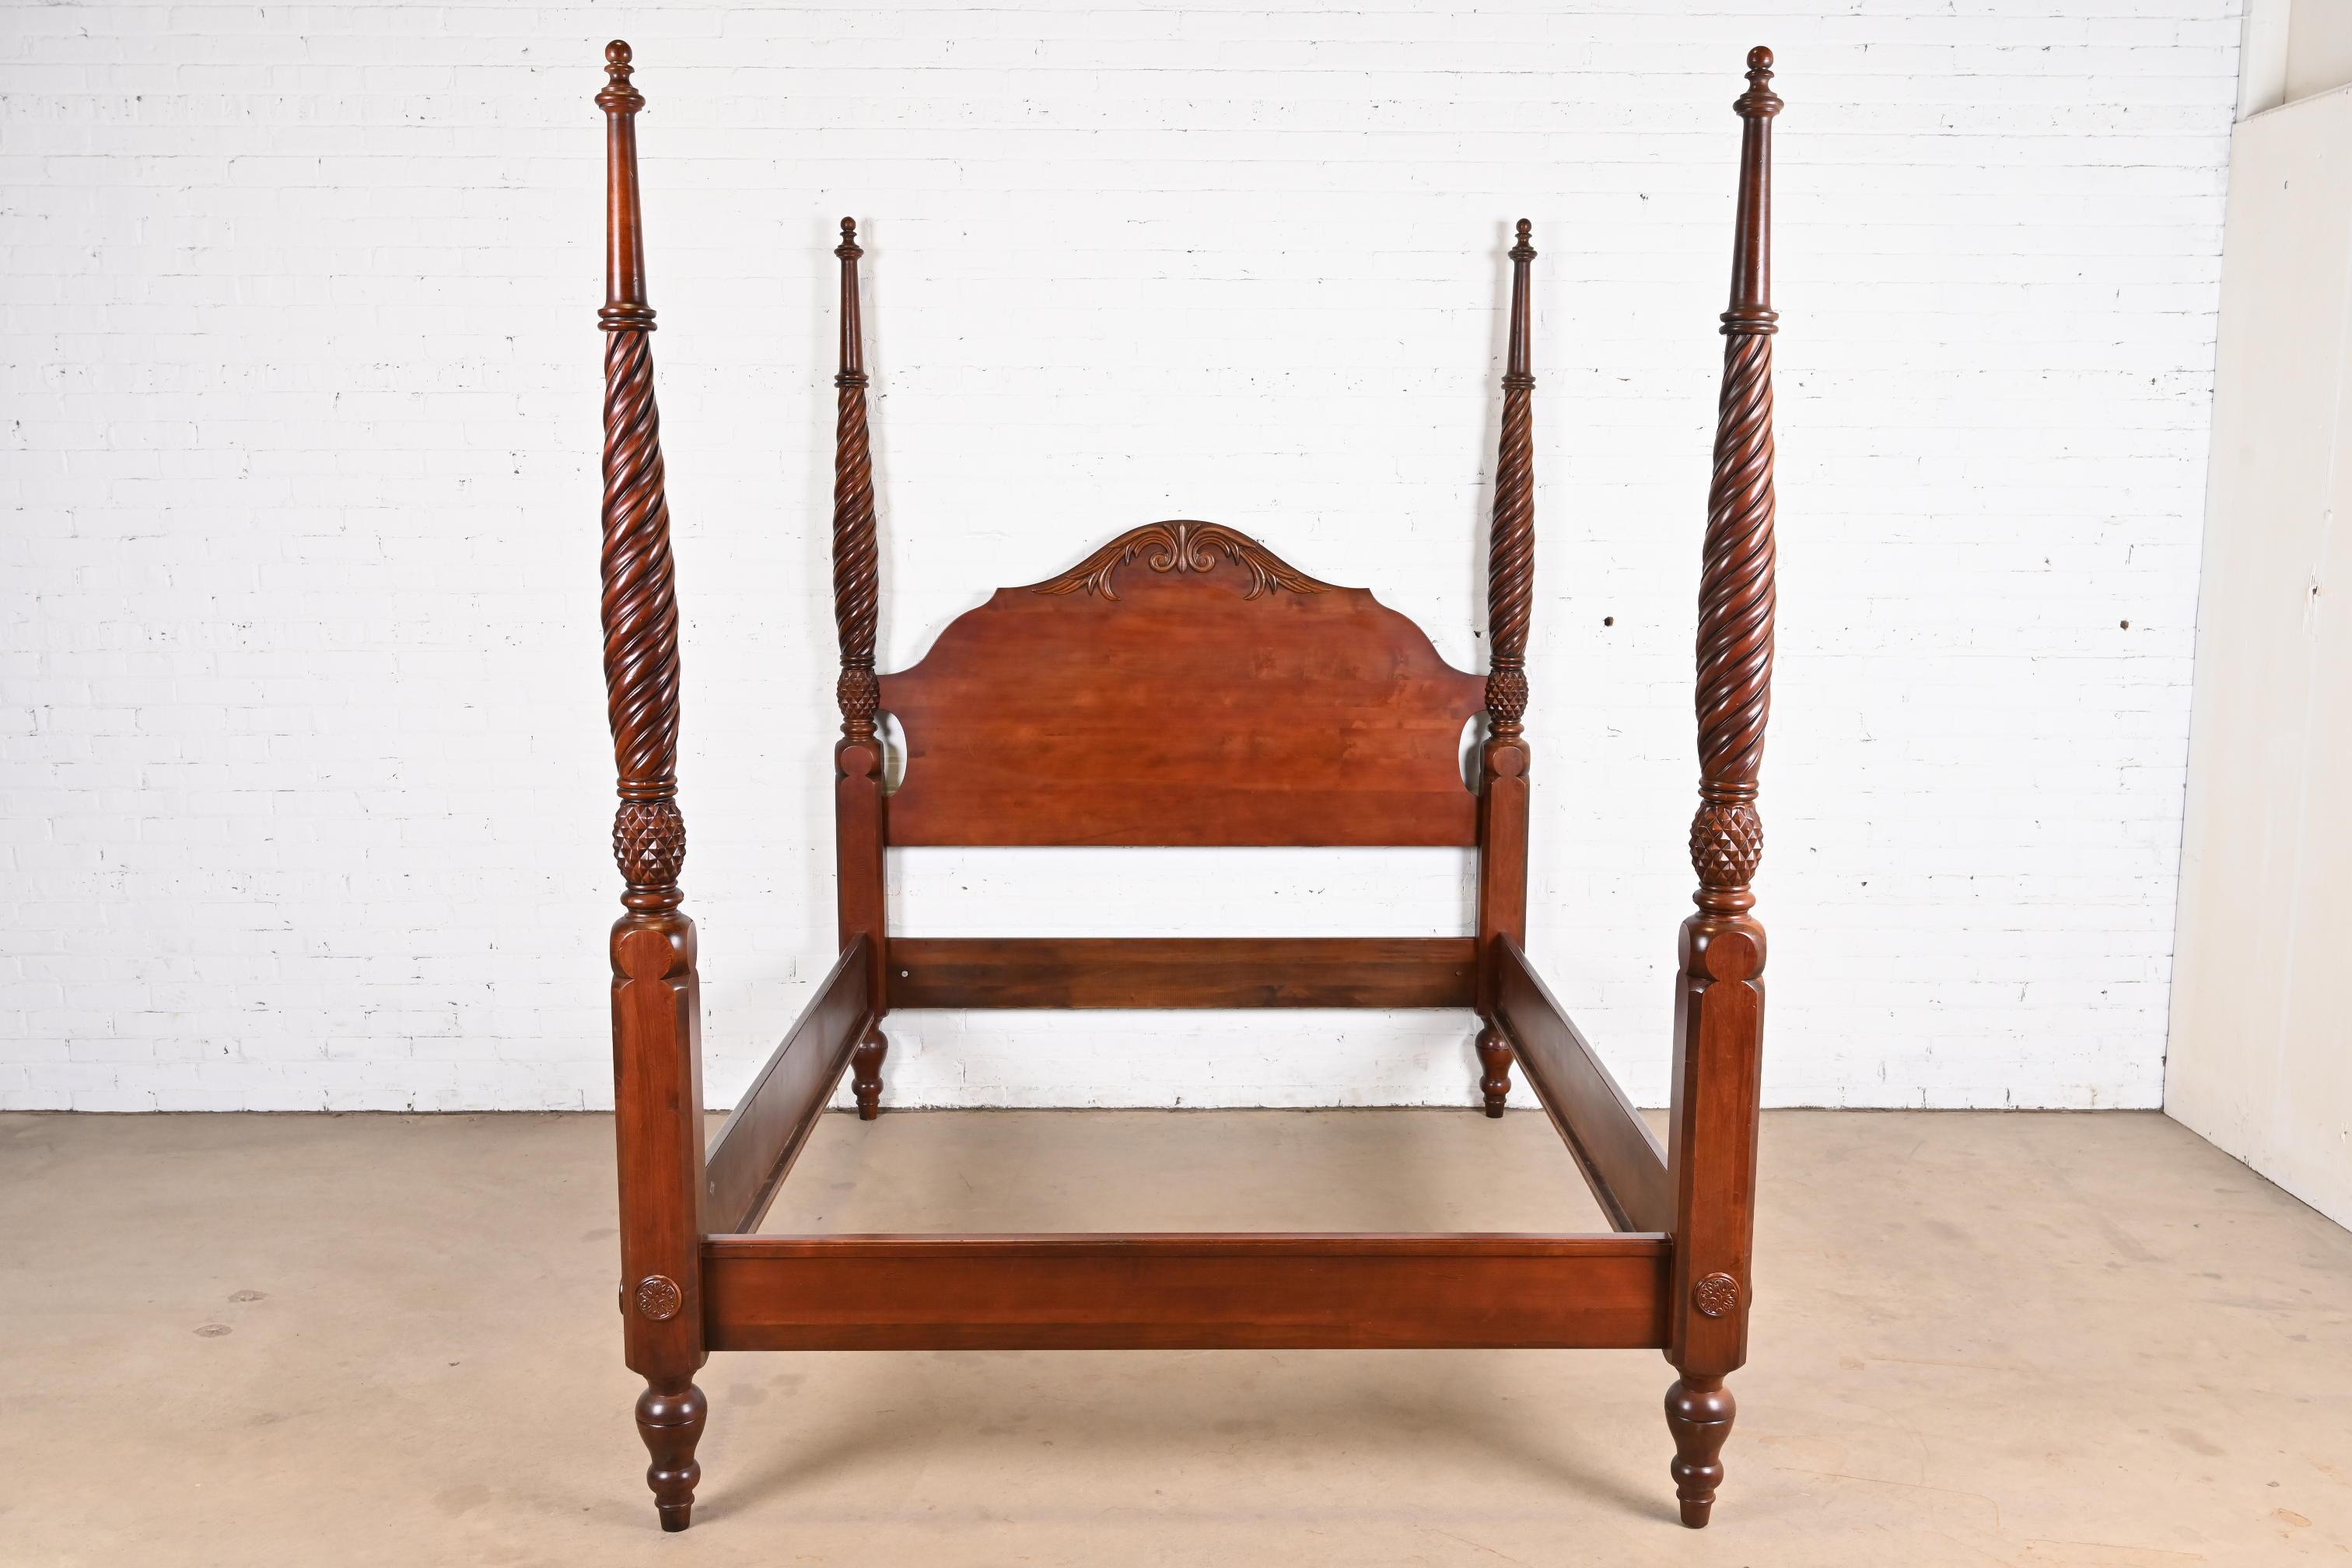 A gorgeous Georgian or Chippendale style carved solid cherry wood four poster queen size bed

USA, Late 20th Century

Measures: 67